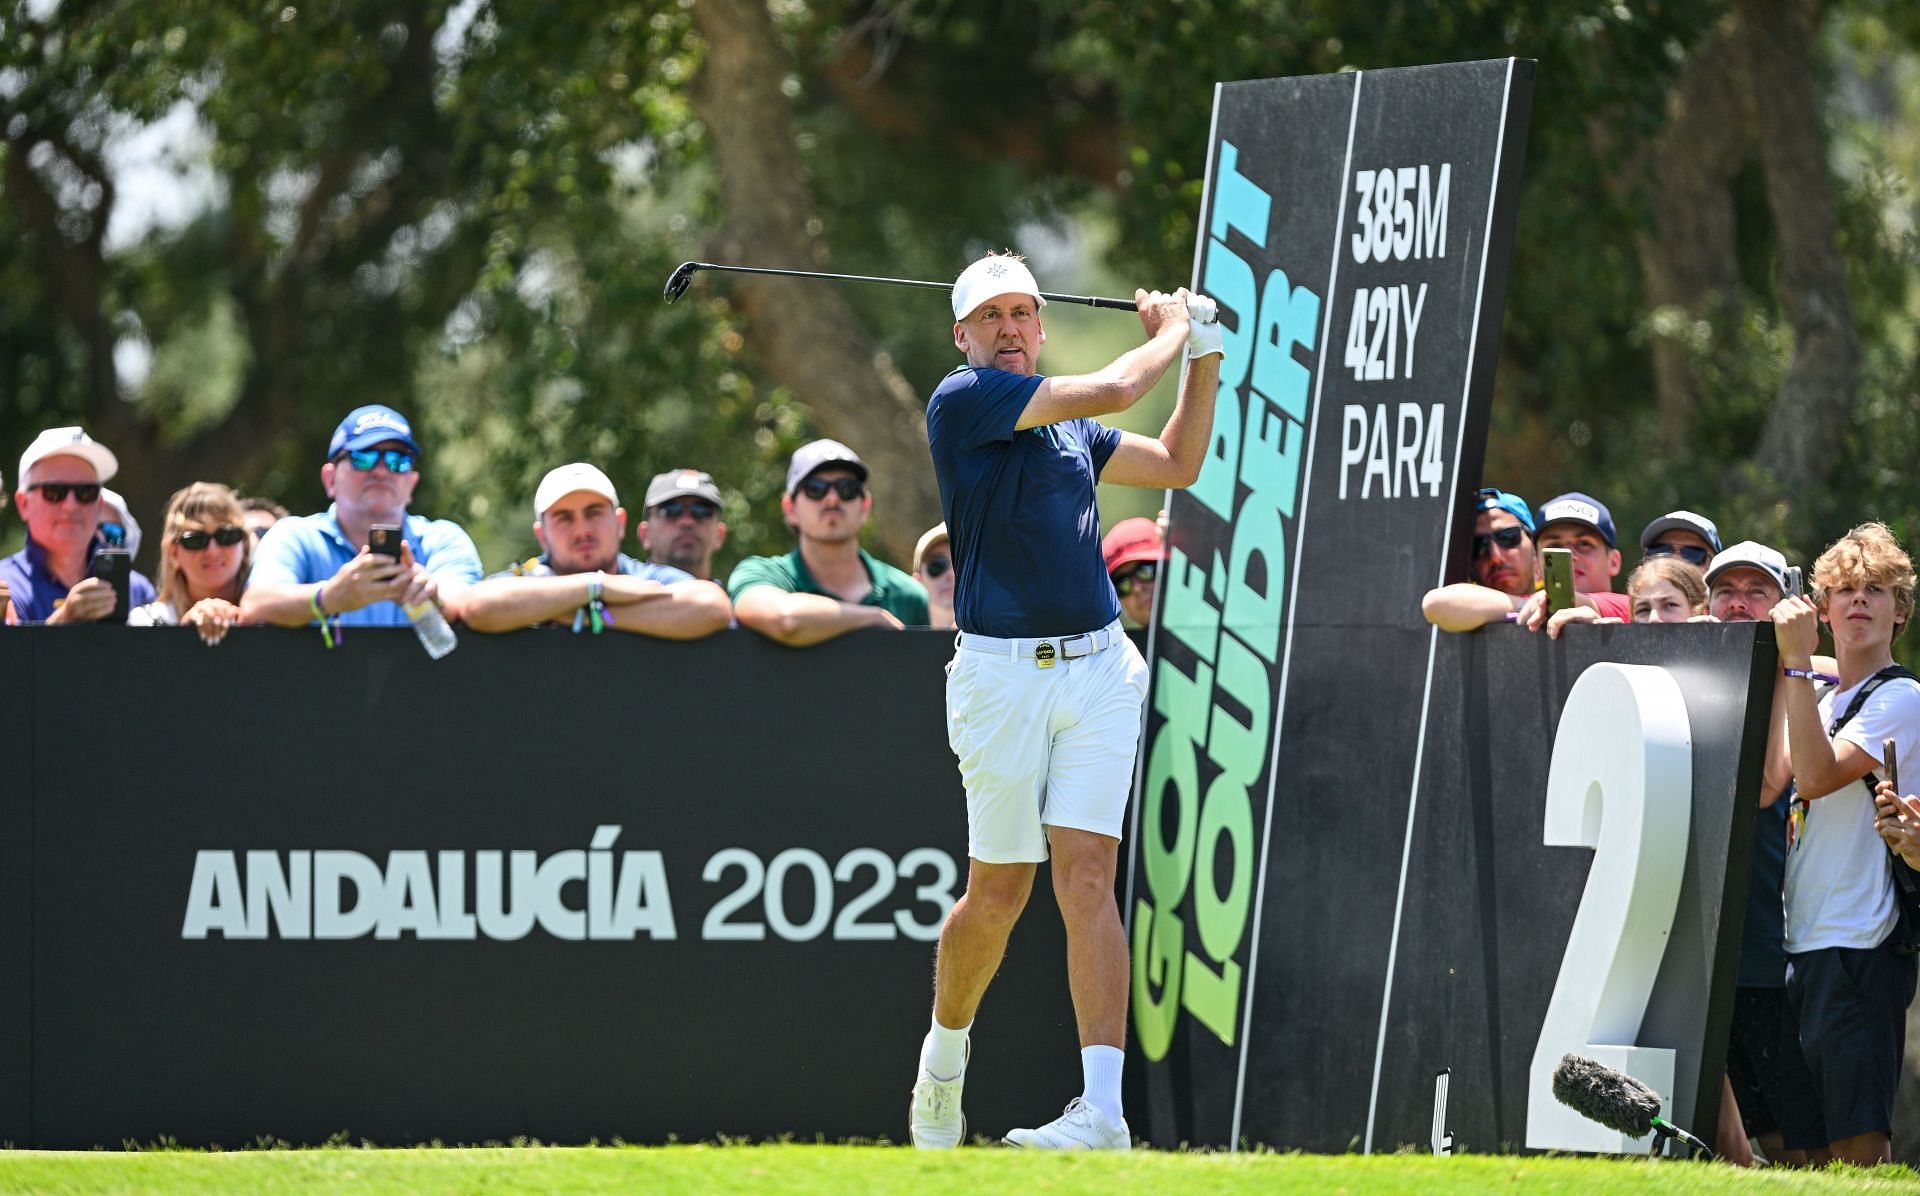 Ian Poulter, LIV Golf - Andalucia - Day Three (Image via Getty).